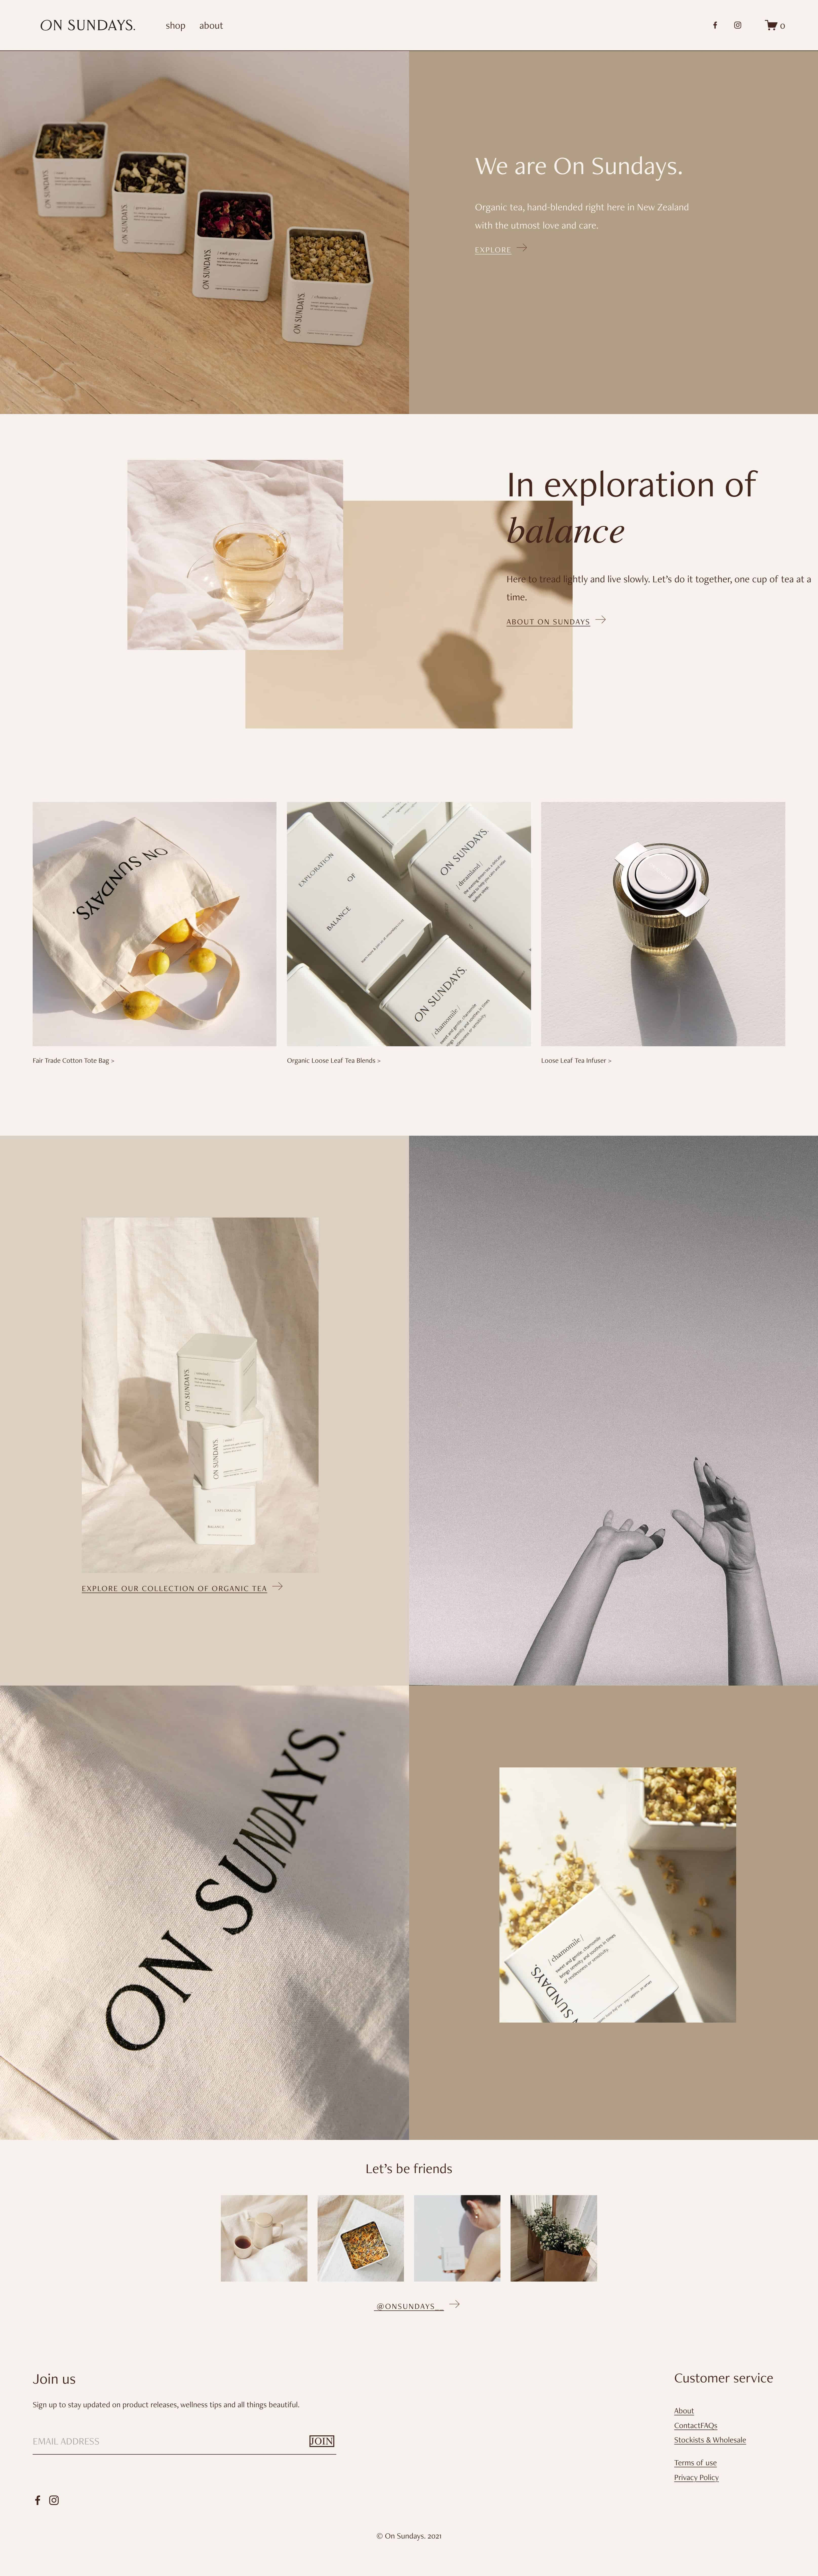 Squarespace Ecommerce Examples 9: On Sundays - Modern Design and Thoughtful Curation